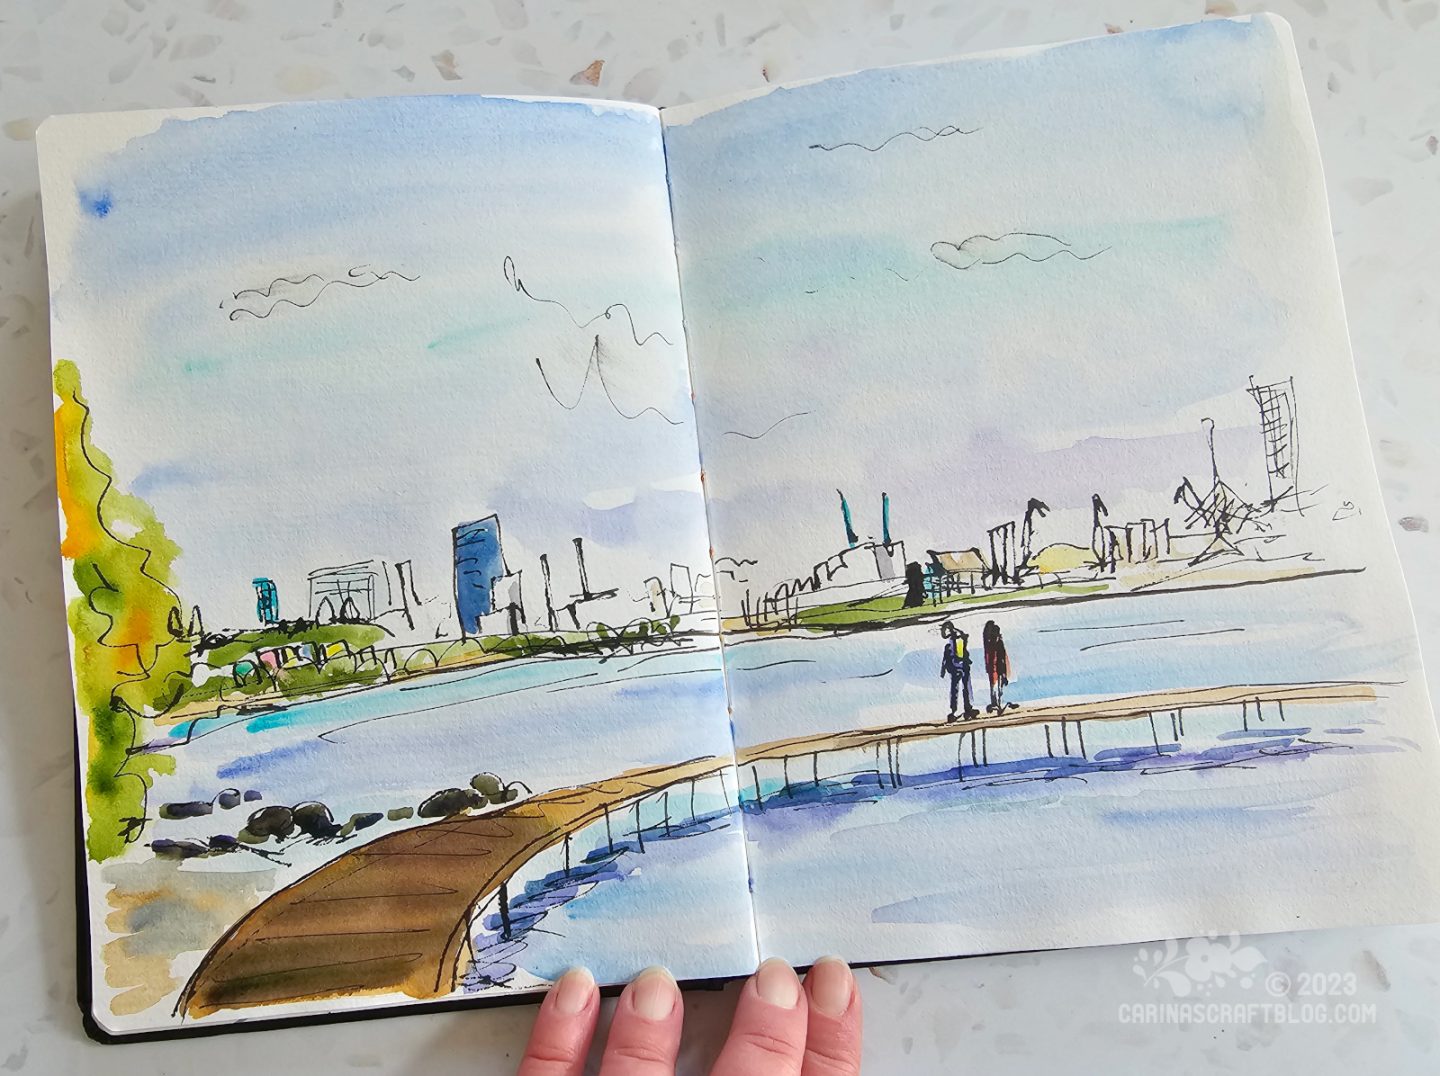 Photo of an open spread in a sketchbook. The spread shows a sketch of a beach with a wooden bridge in the foreground and the skyline of a city in the background.